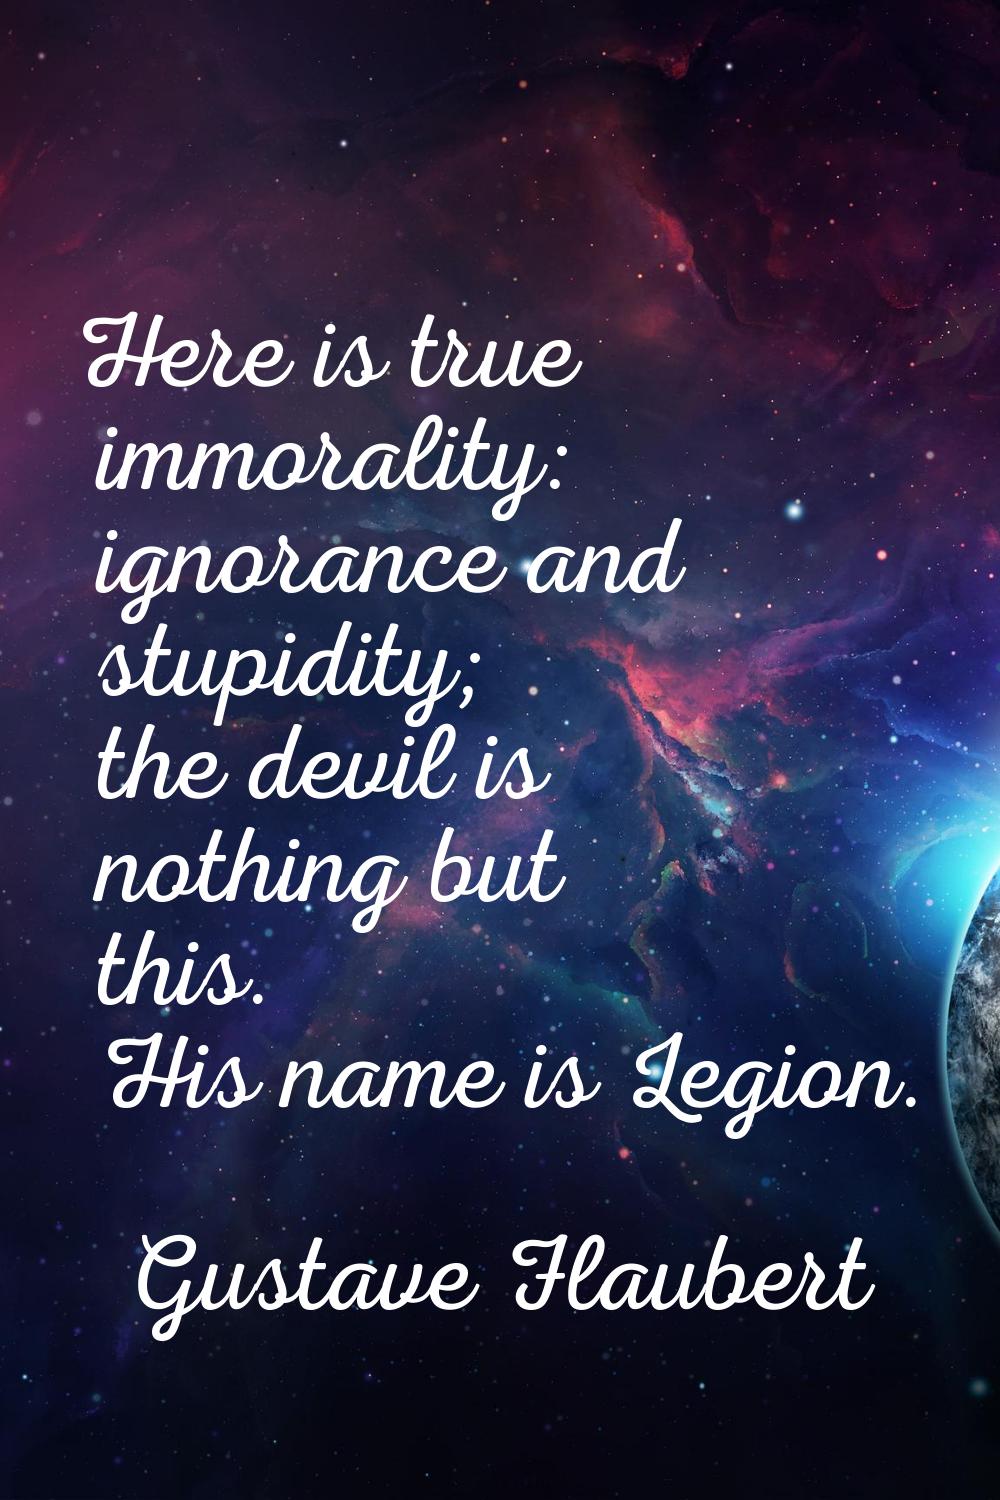 Here is true immorality: ignorance and stupidity; the devil is nothing but this. His name is Legion